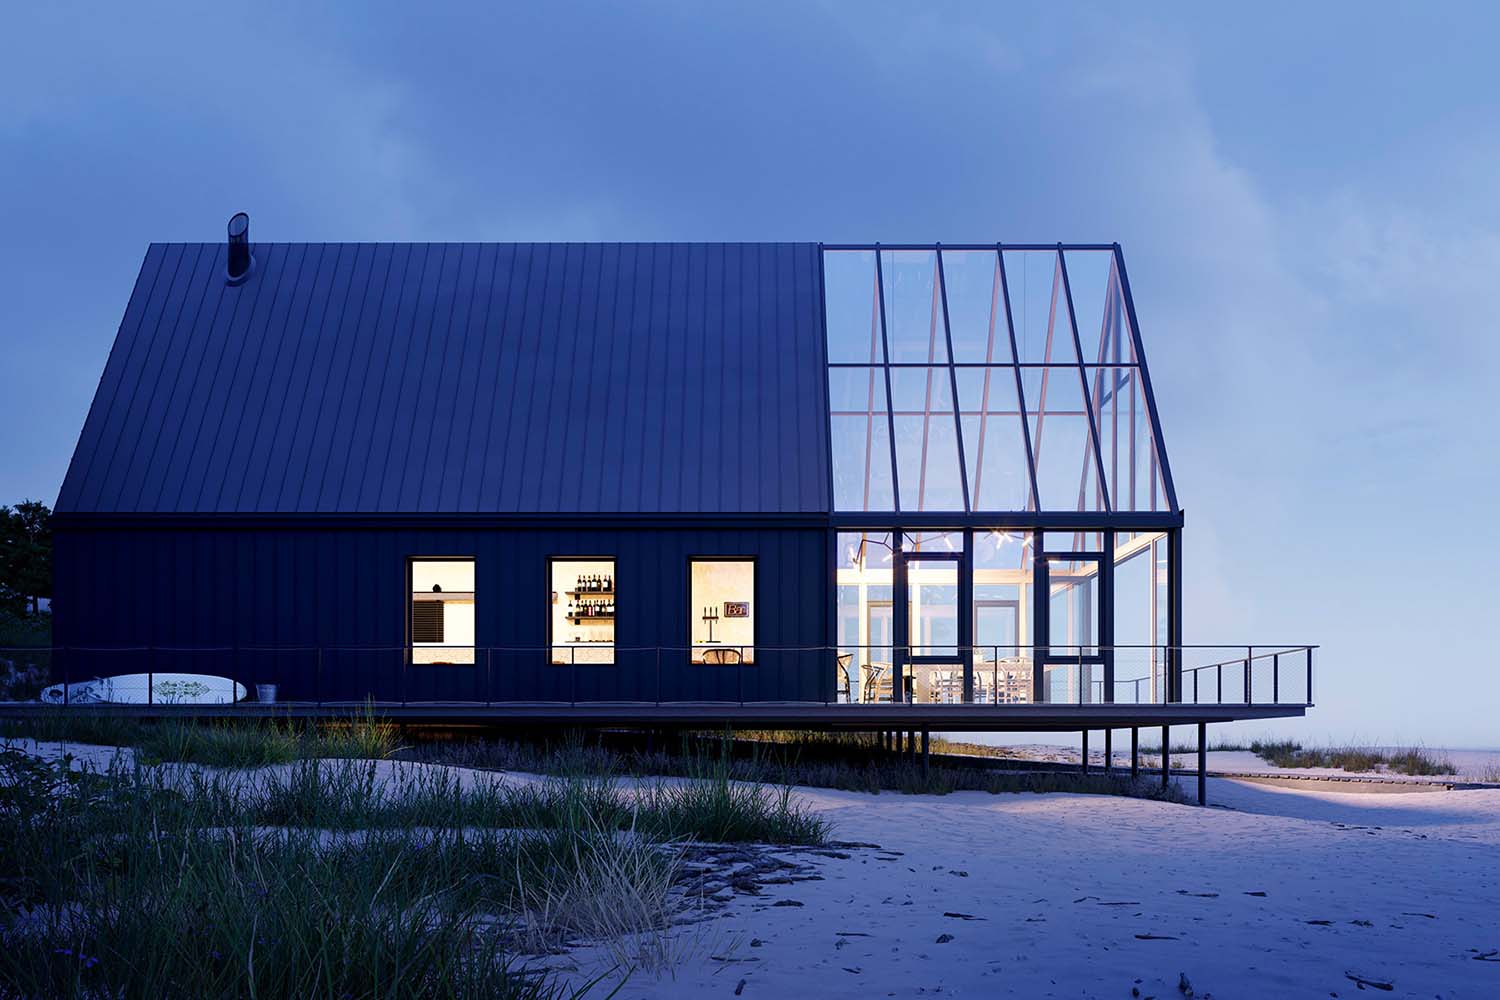 Beach Cabin On The Baltic Sea Hospitality by Peter Kuczia is Winner in Architecture, Building and Structure Design Category, 2021 - 2022.